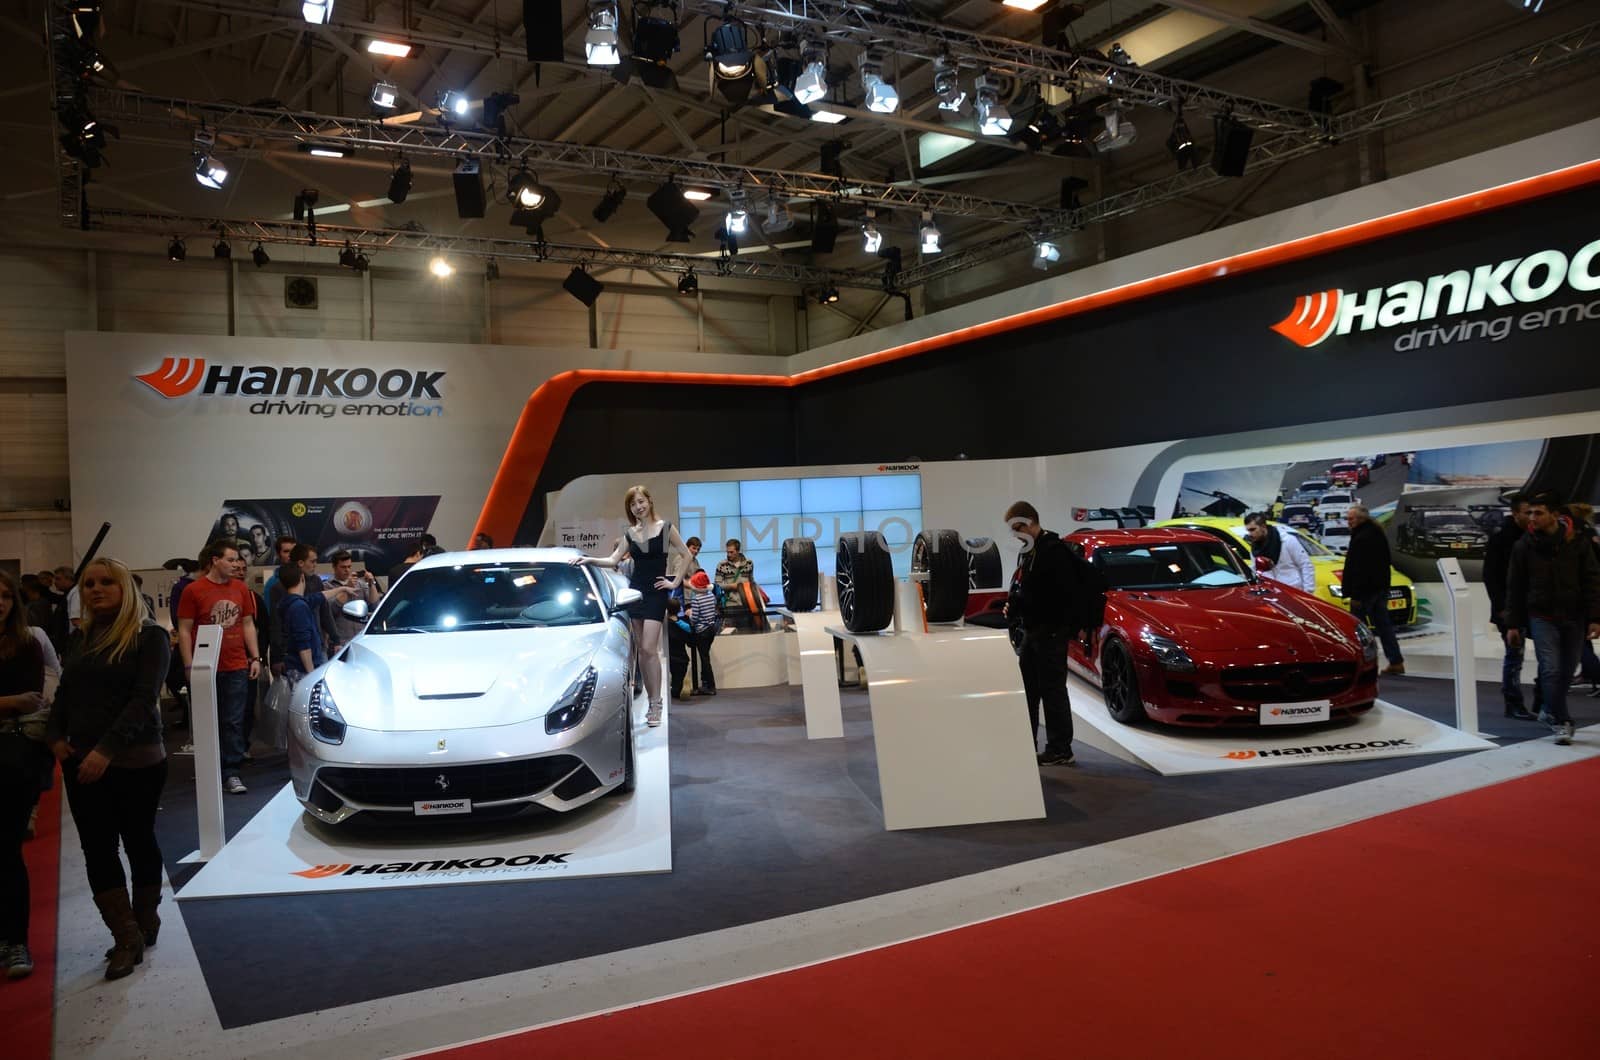 ESSEN, GERMANY - December 8: Modern Ferrari and Mercedes with Hankook tires during Essen Motor Show in Germany, on December 8, 2013.